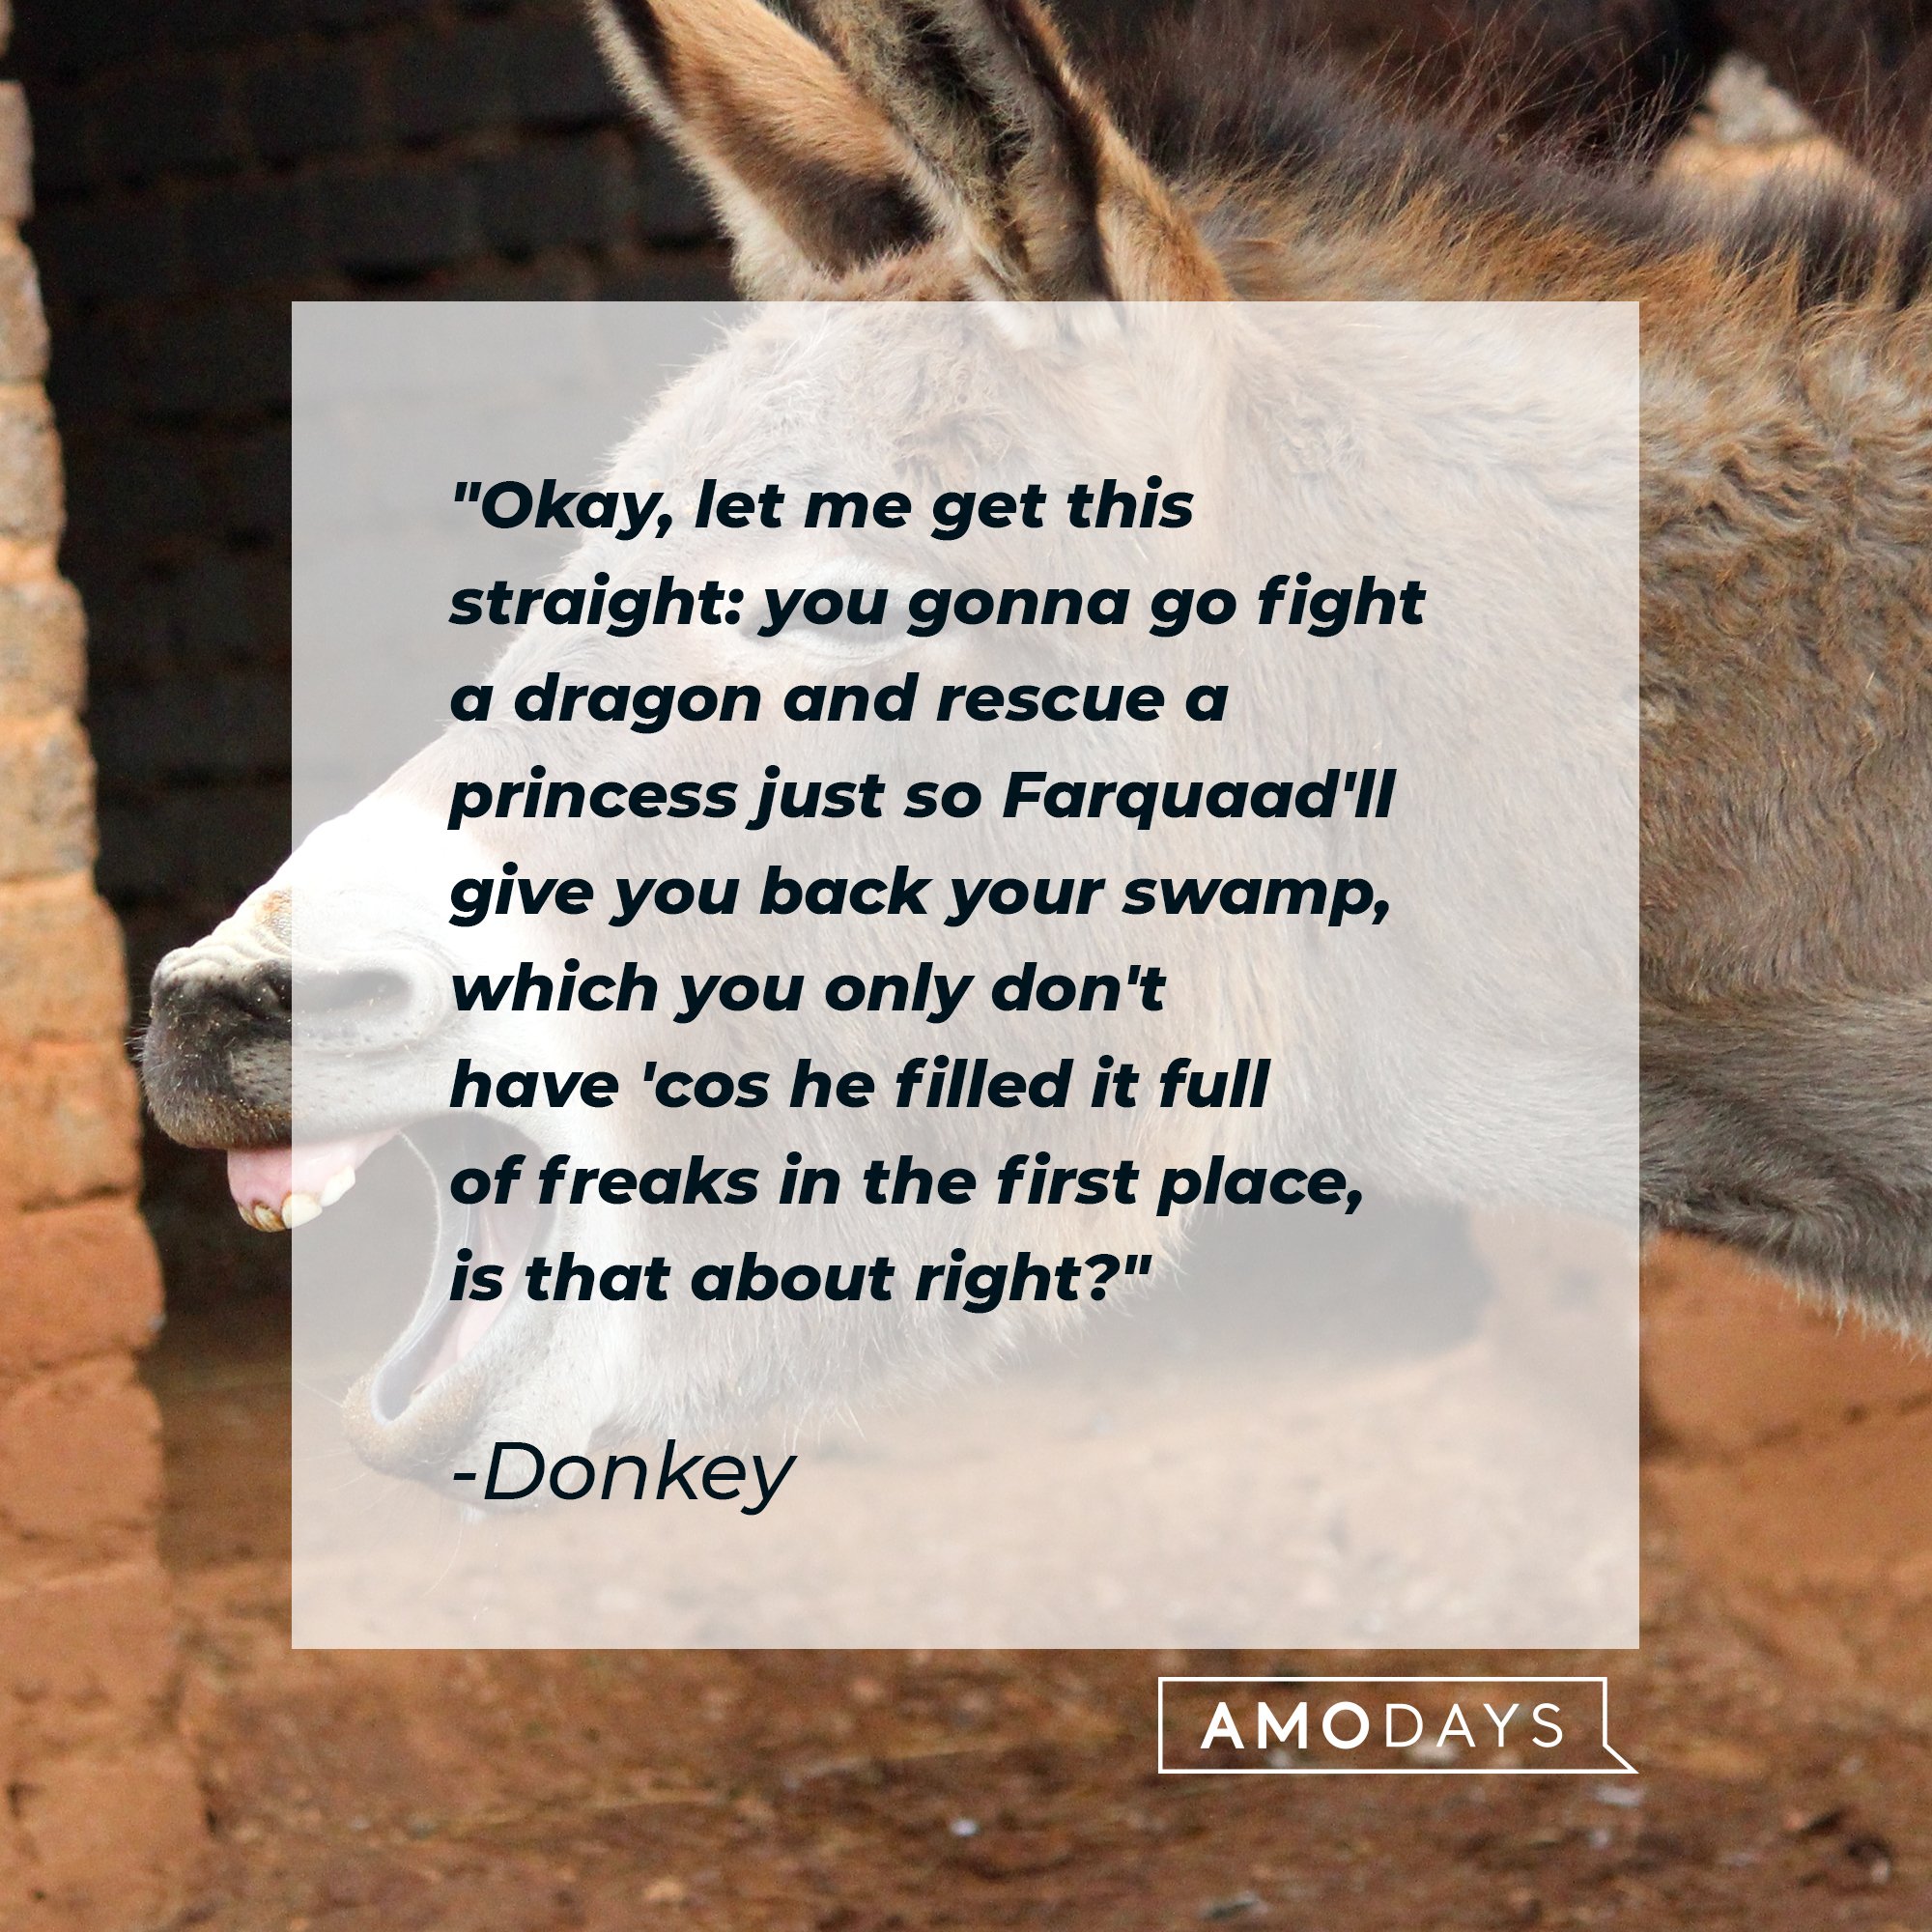 Donkey's quote: "Okay, let me get this straight: you gonna go fight a dragon and rescue a princess just so Farquaad'll give you back your swamp, which you only don't have 'cos he filled it full of freaks in the first place, is that about right?" | Image: AmoDays